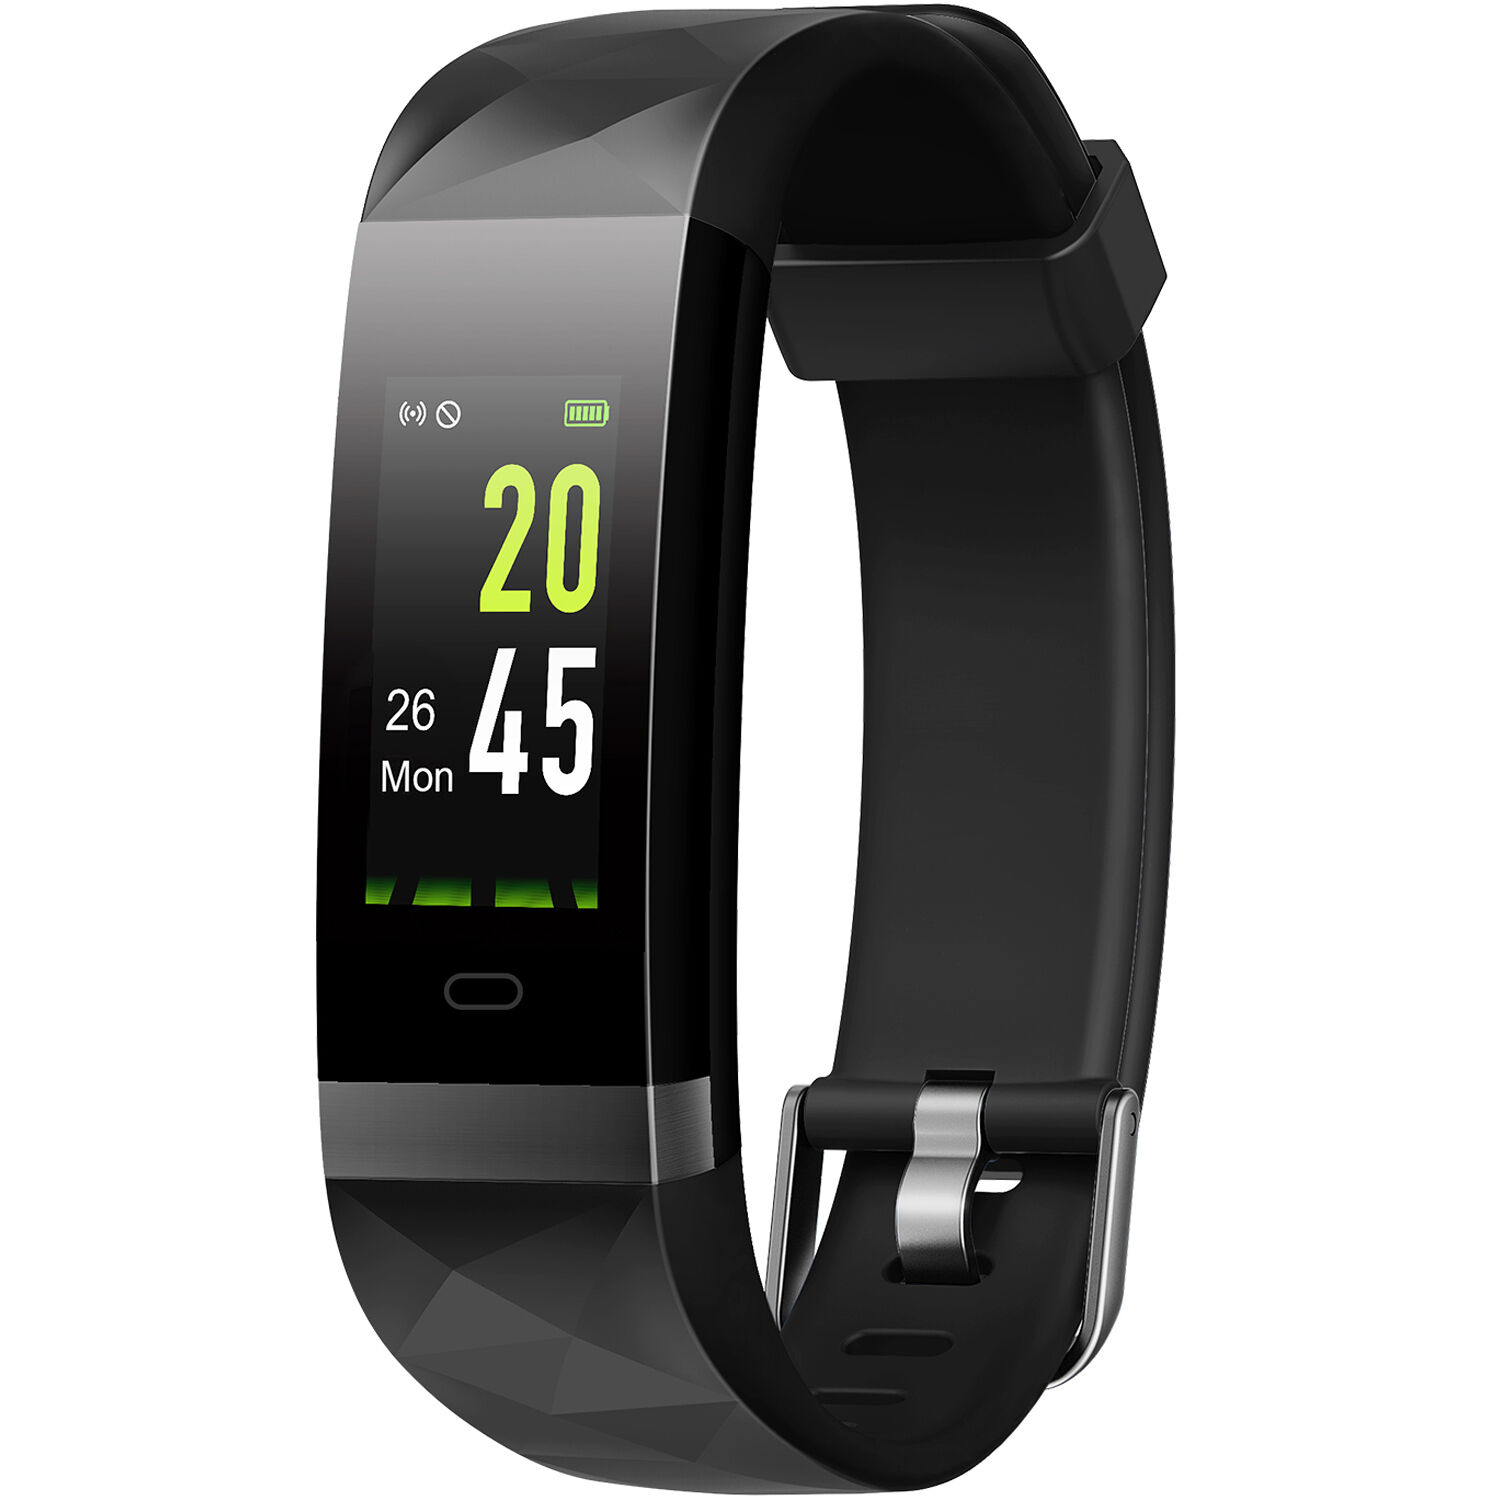 Letscom ID131Color HR Fitness Tracker 